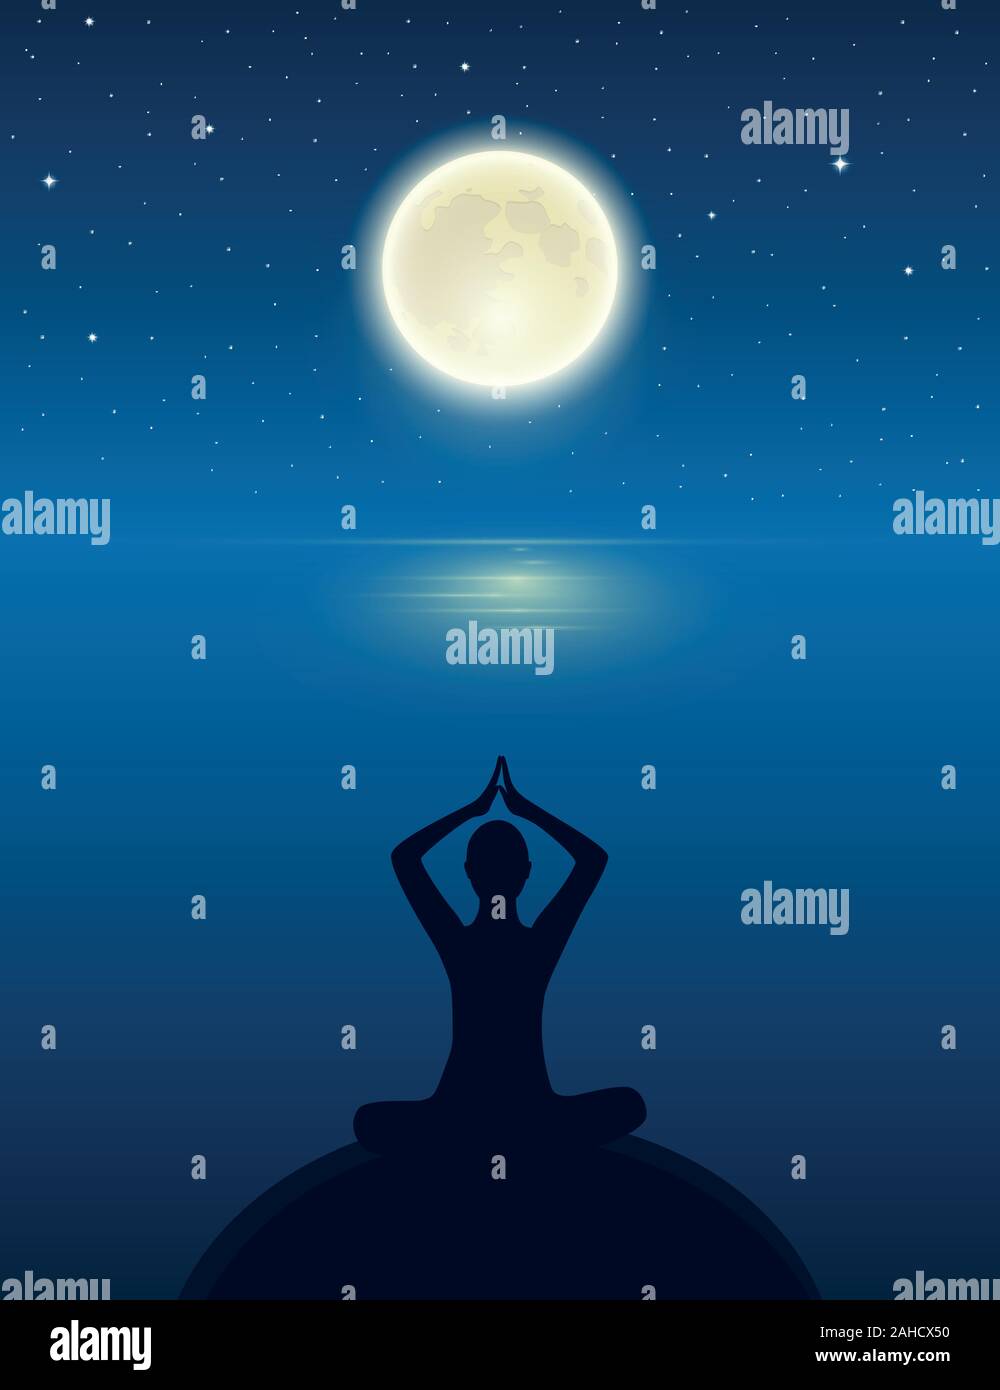 yoga meditating person silhouette by the ocean with full moon and starry sky vector illustration EPS10 Stock Vector